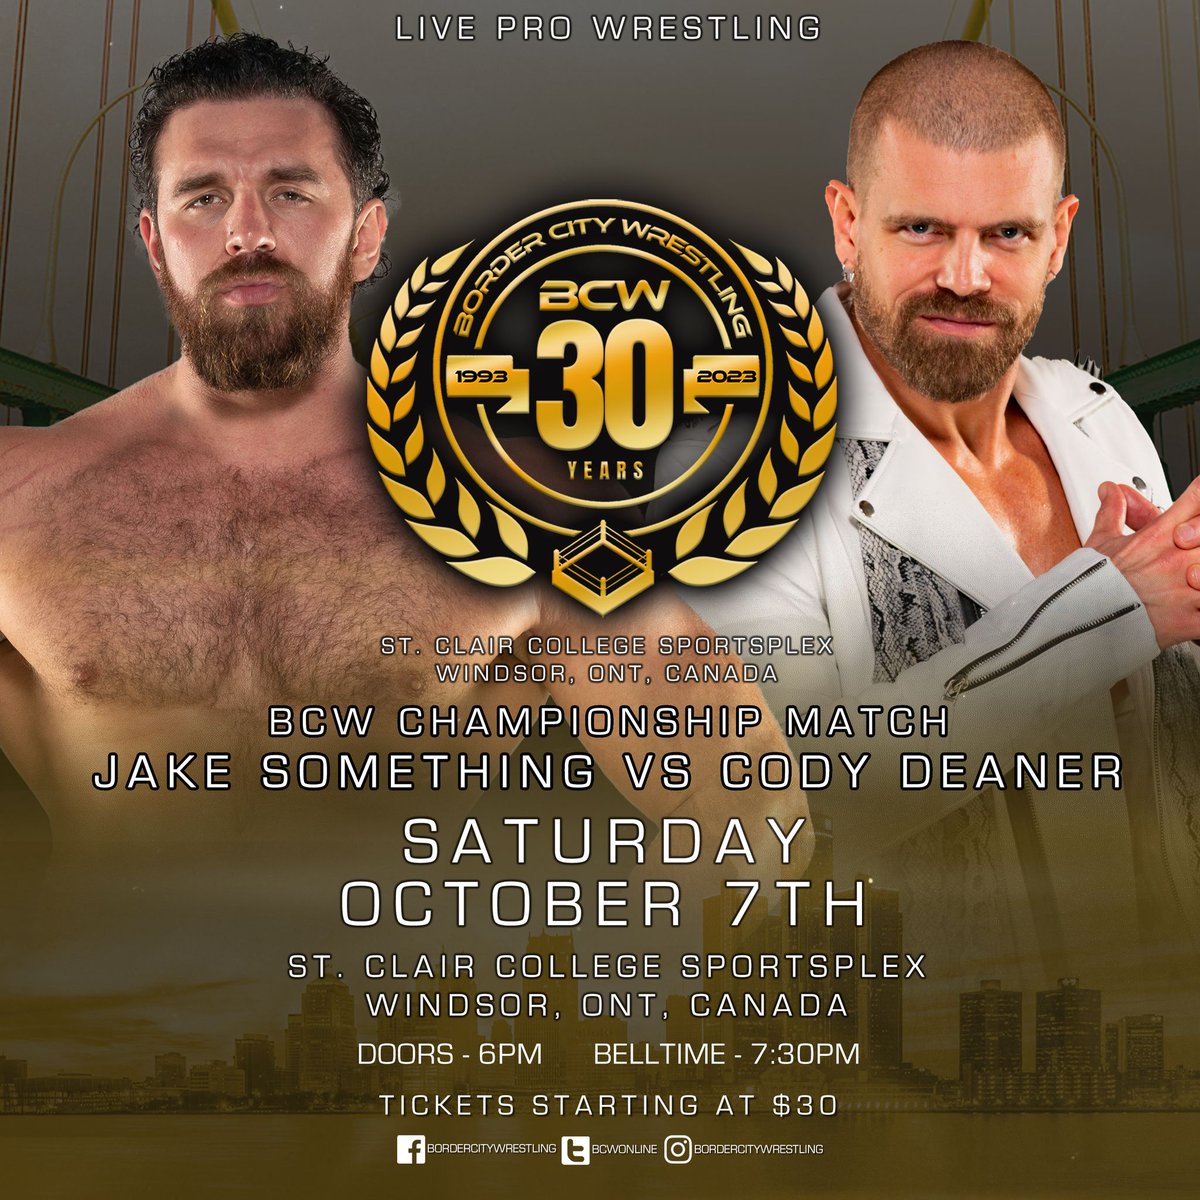 Match Announcement Monday! Saturday at The @stclaircollege SportsPlex - The BCW Championship on the line as @CodyDeaner defends against (Don't call him Cousin) @JakeSomething_! Don't miss BCW's Historic 30th Anniversary! TICKETS - BCW30.eventbrite.ca